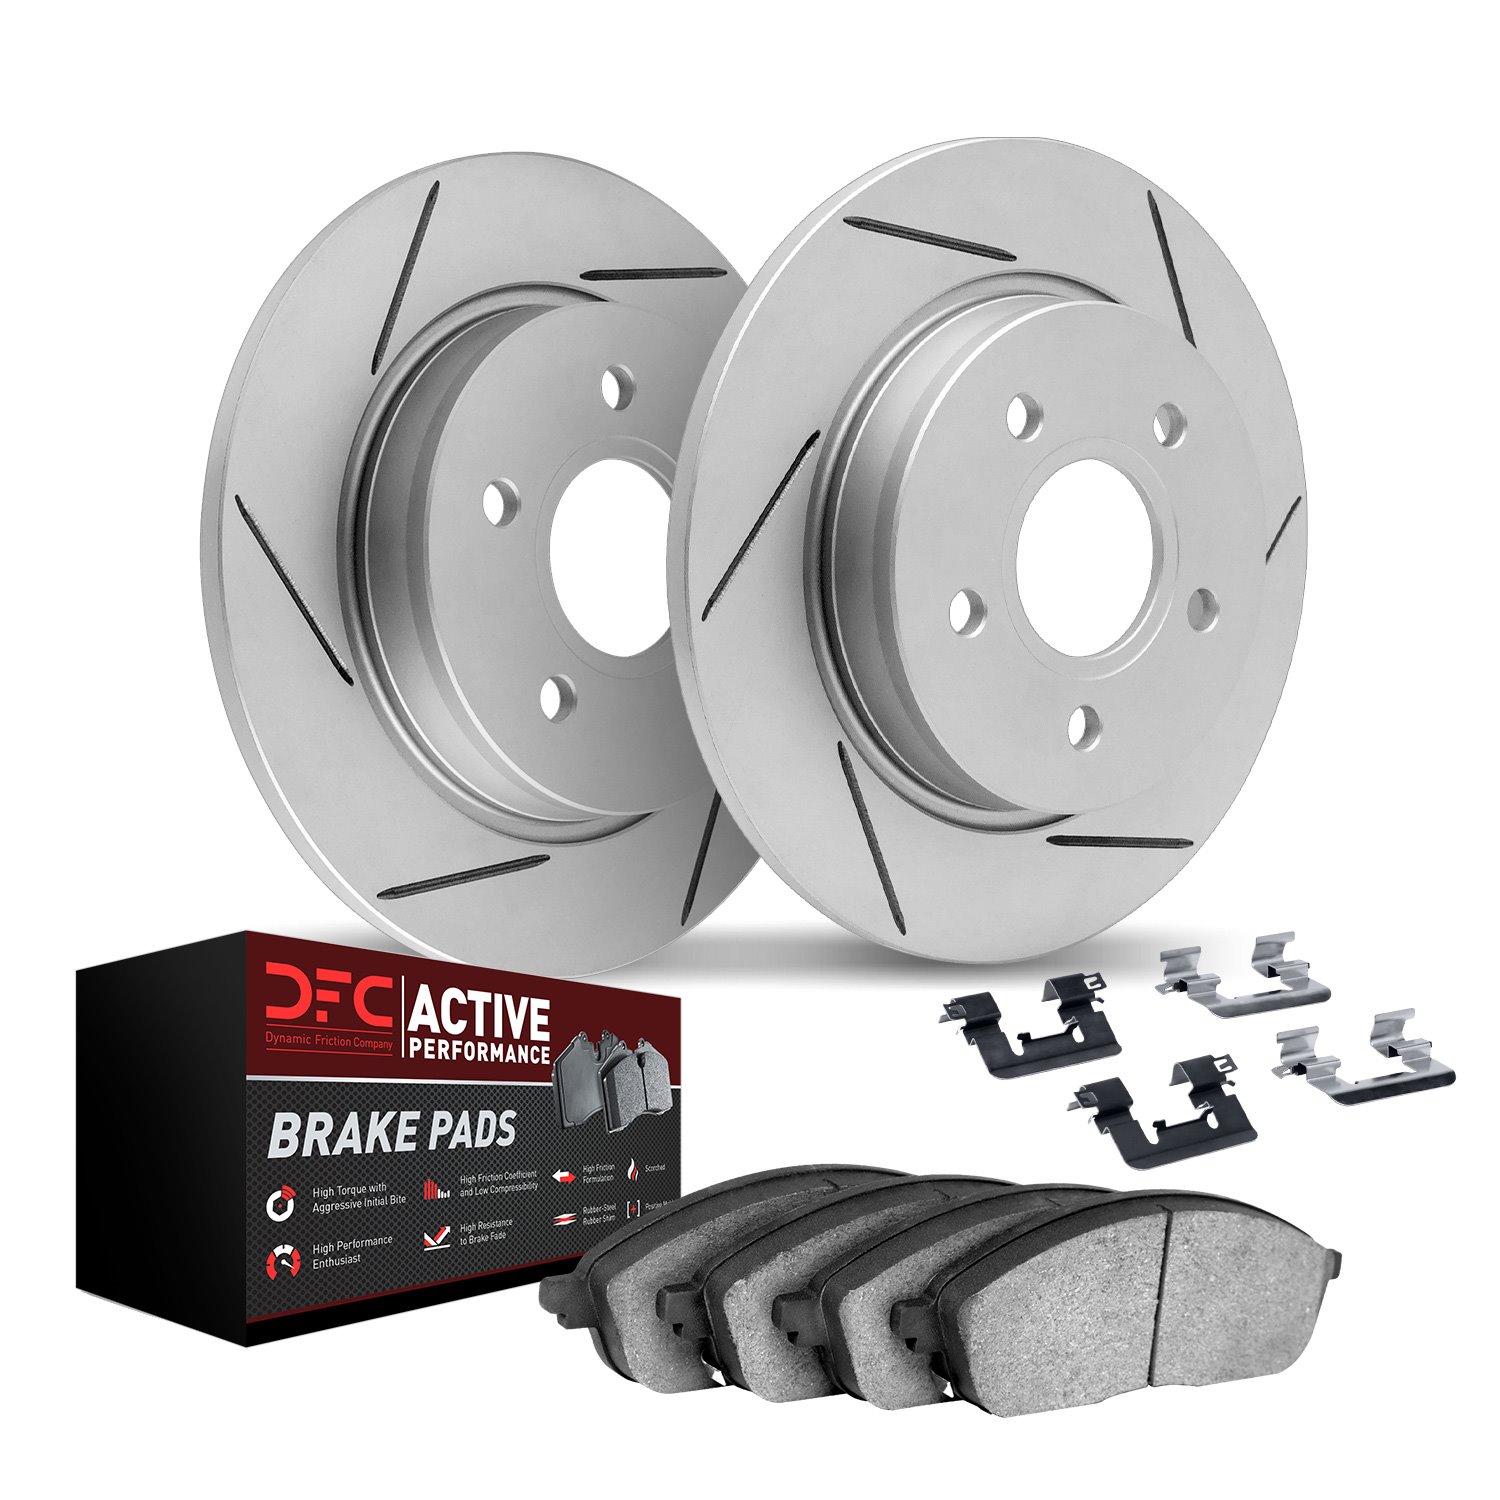 2712-59048 Geoperformance Slotted Brake Rotors with Active Performance Pads Kits & Hardware, 1997-2006 Acura/Honda, Position: Re